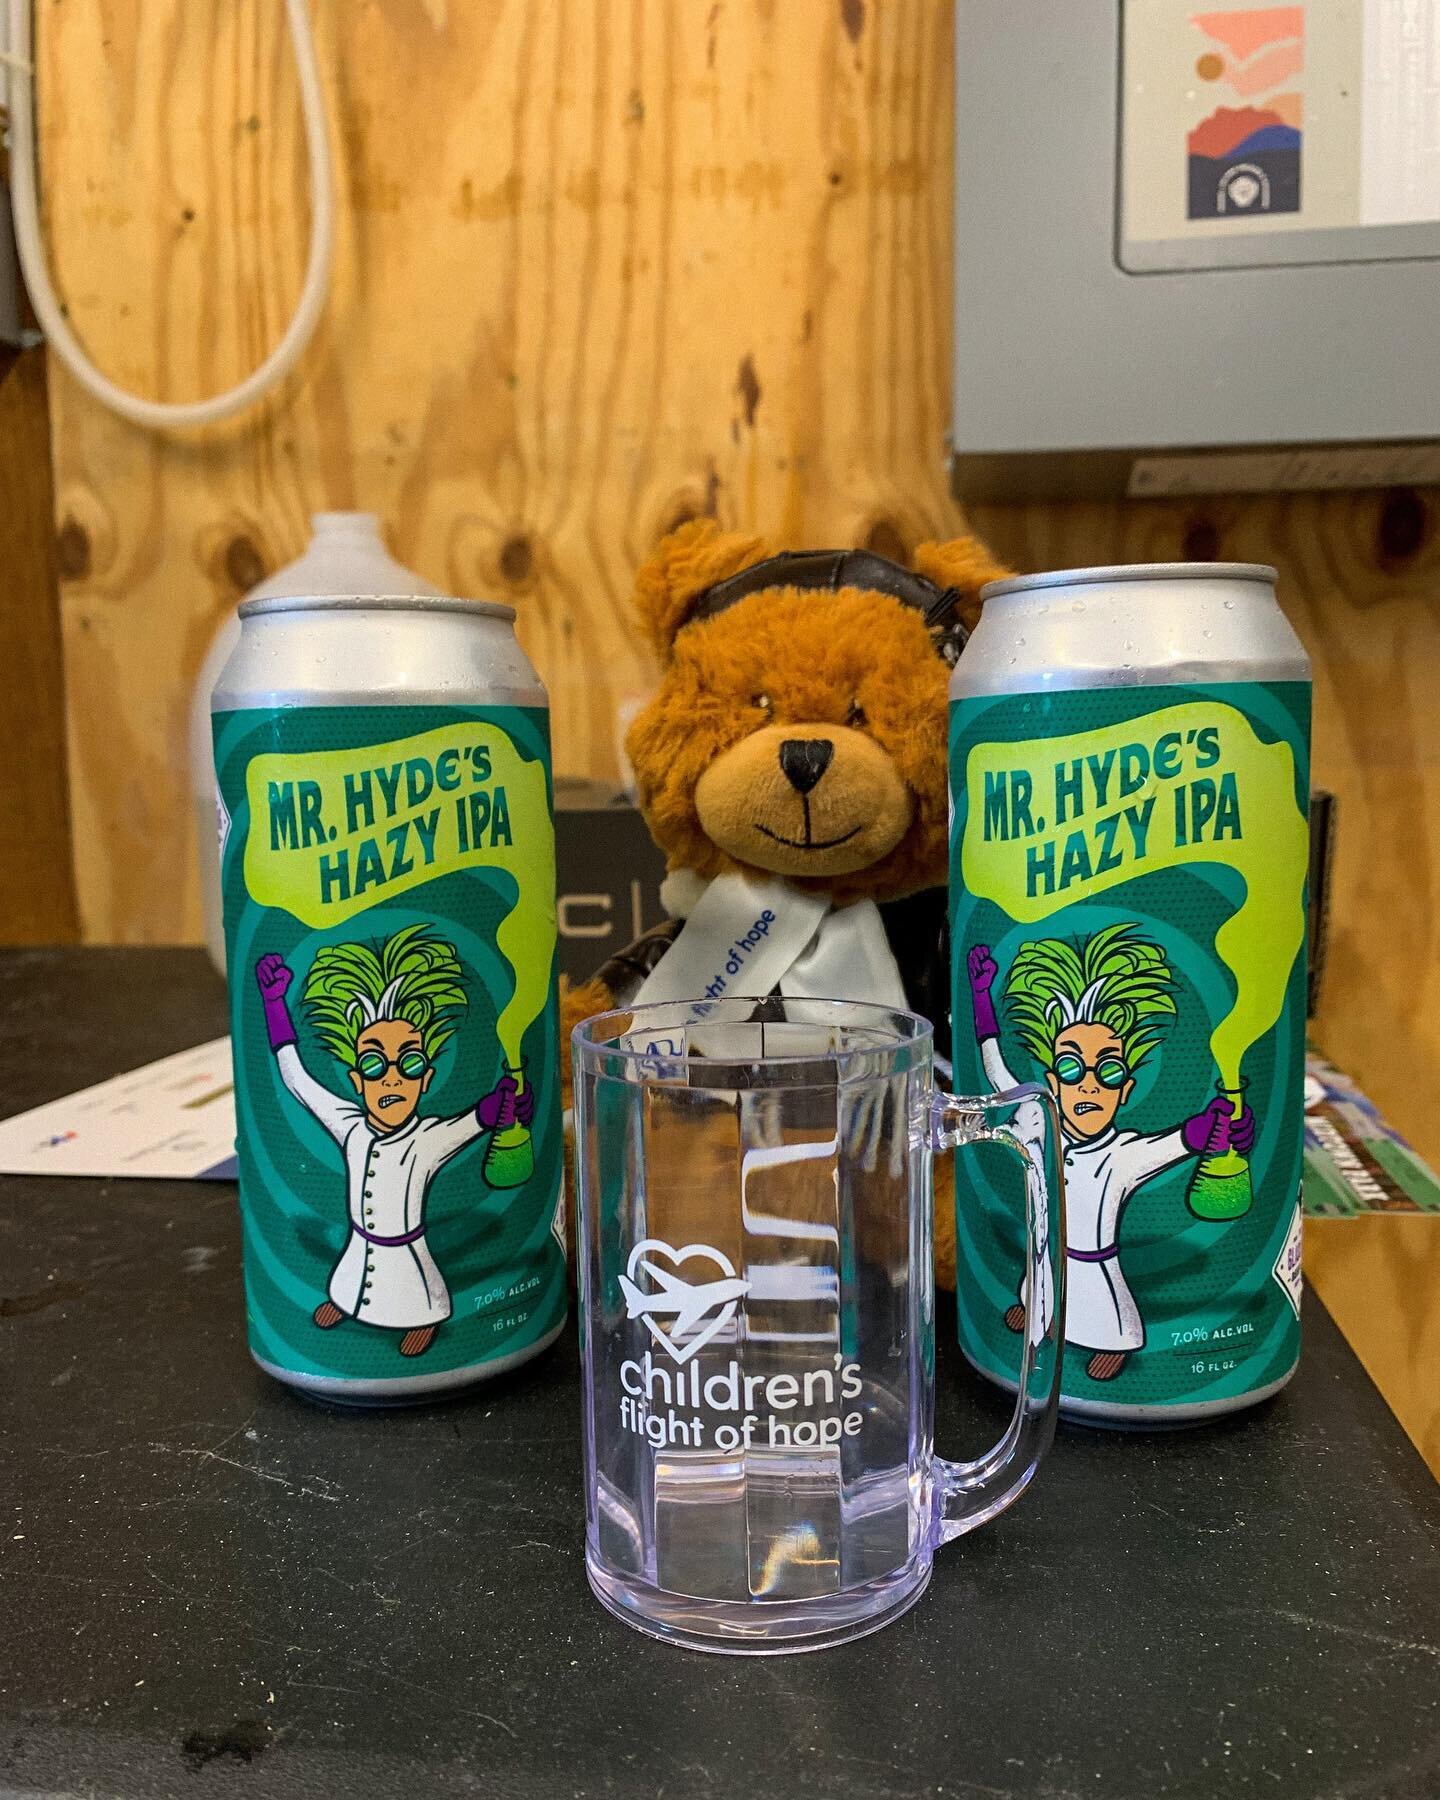 Super Bowl Party at RTP — The Glass Jug Beer Lab